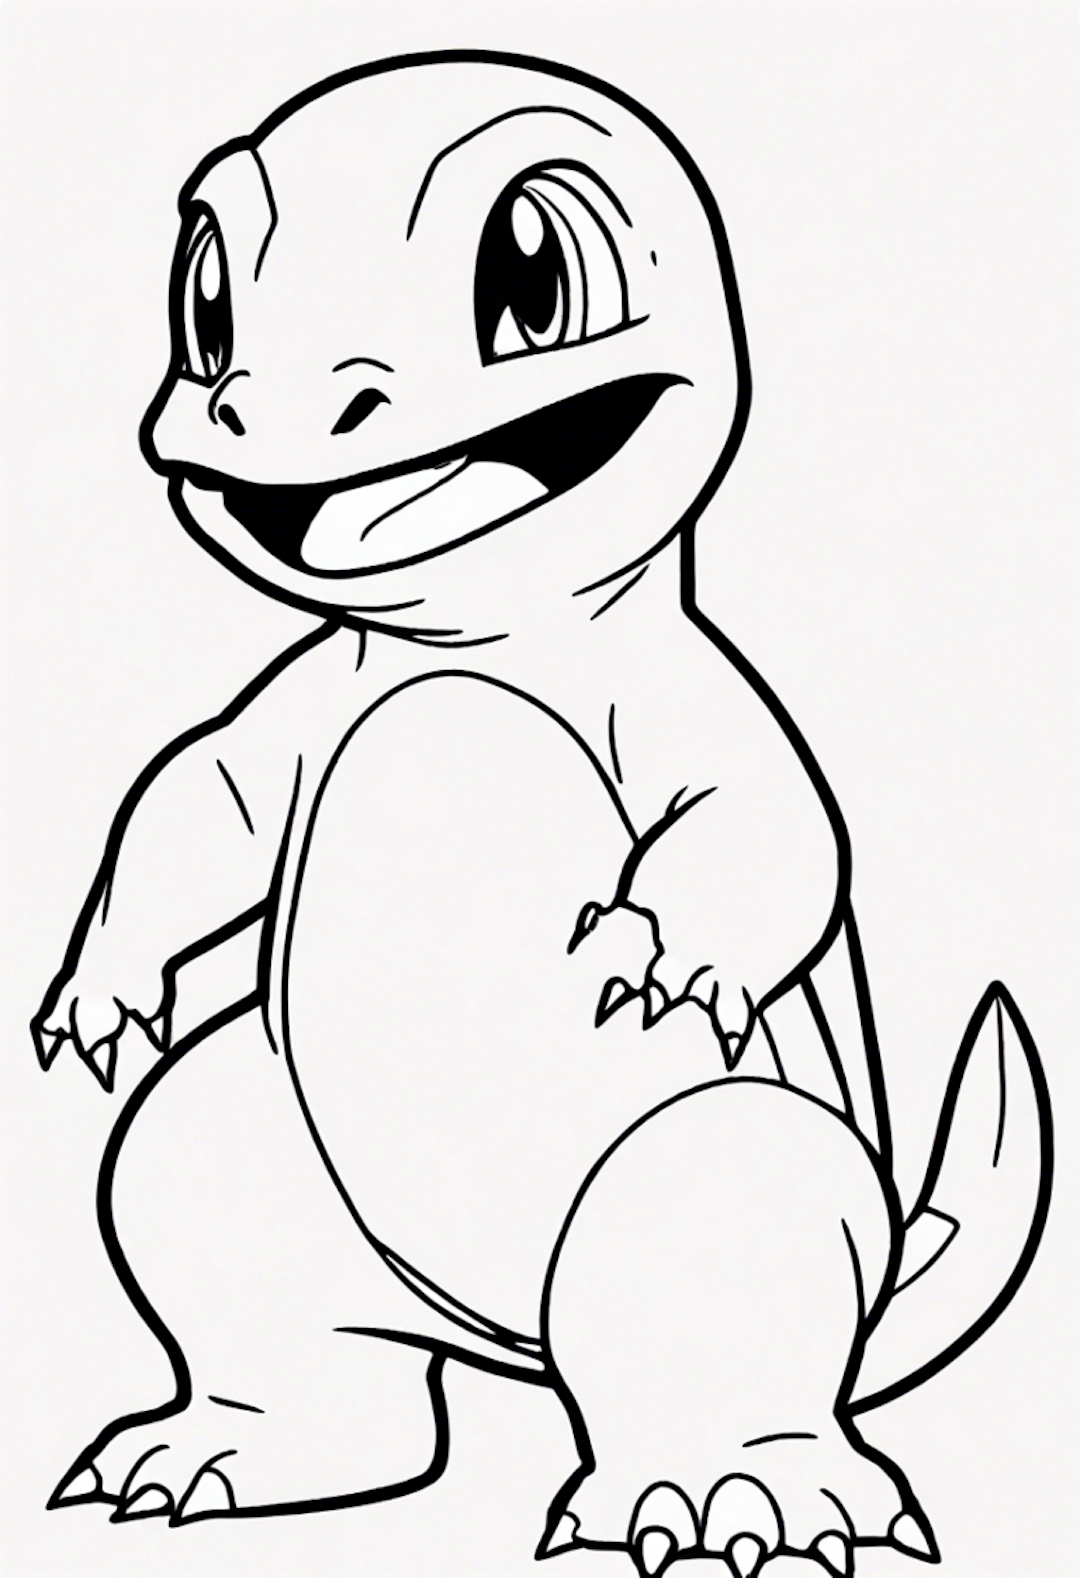 Charmander’s Playful Adventure Coloring Page coloring pages